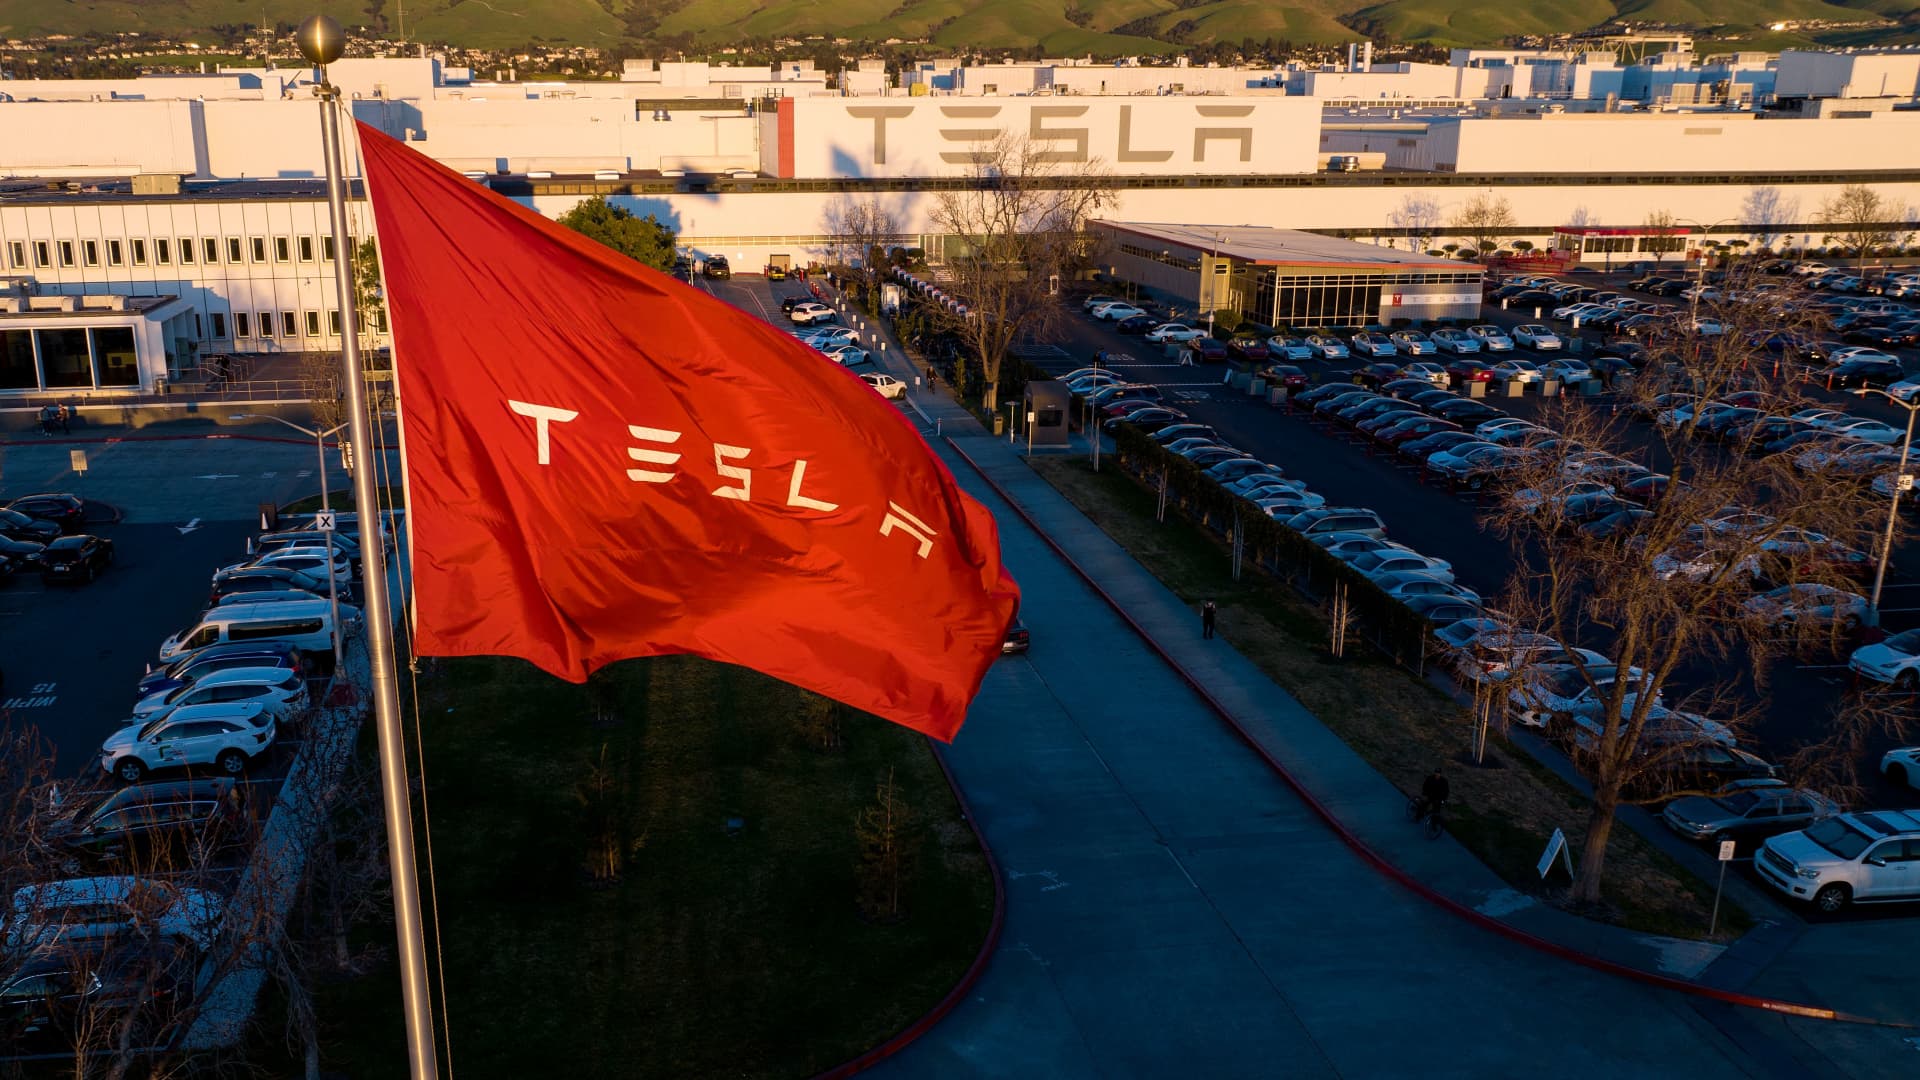 Tesla raising factory worker pay in U.S., as UAW aims to organize